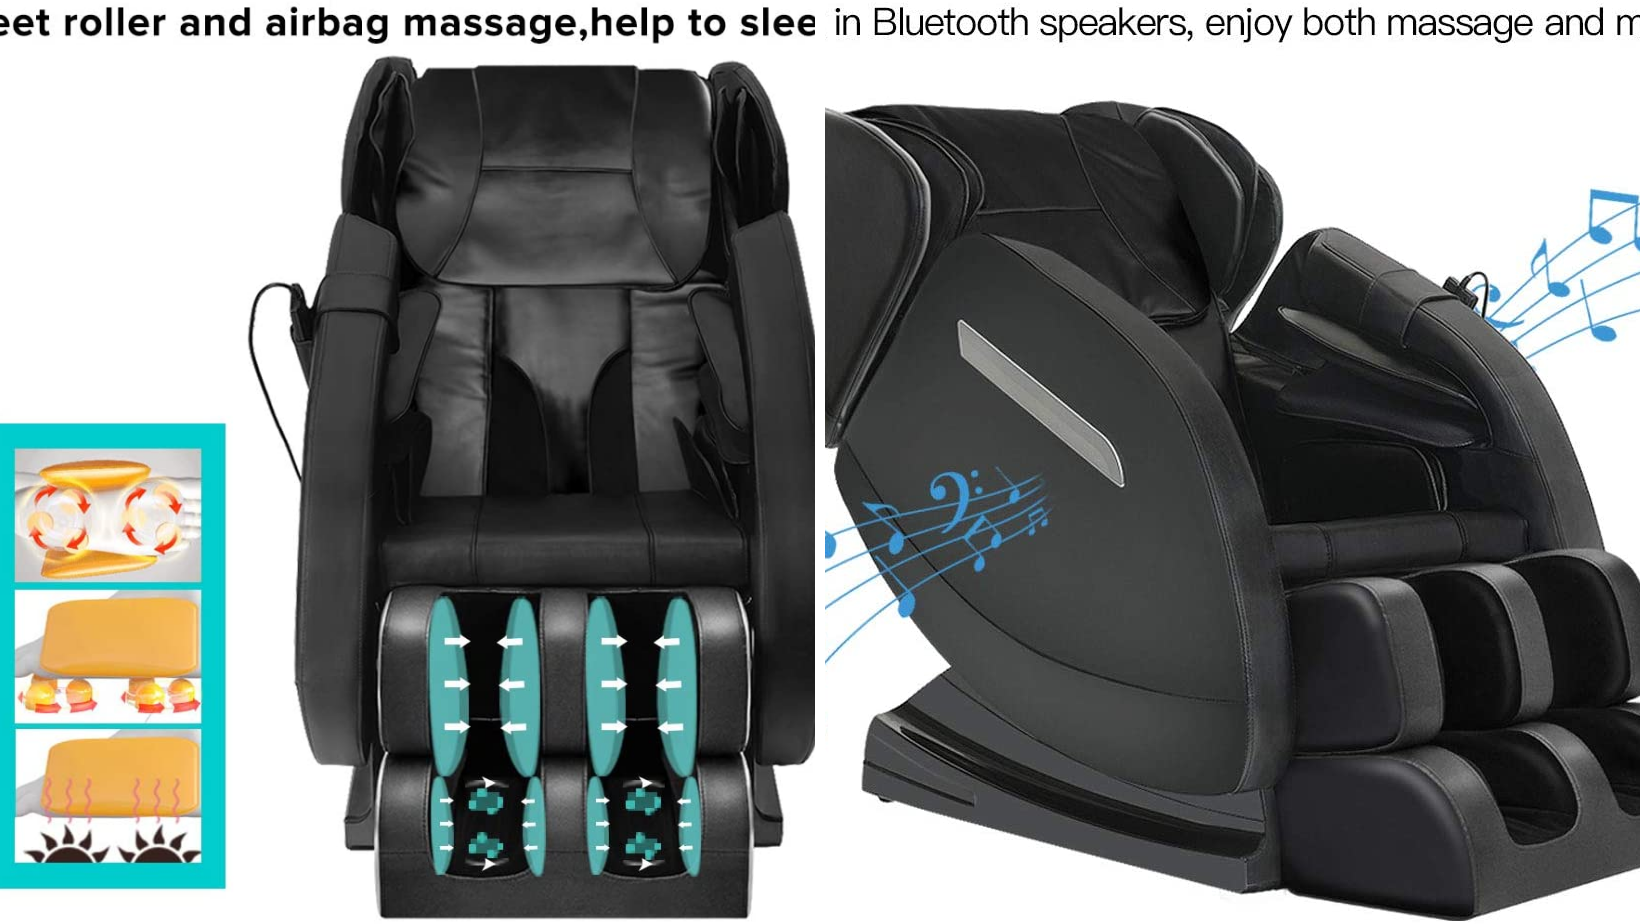 SMAGREHO Massage Chair Review 2022